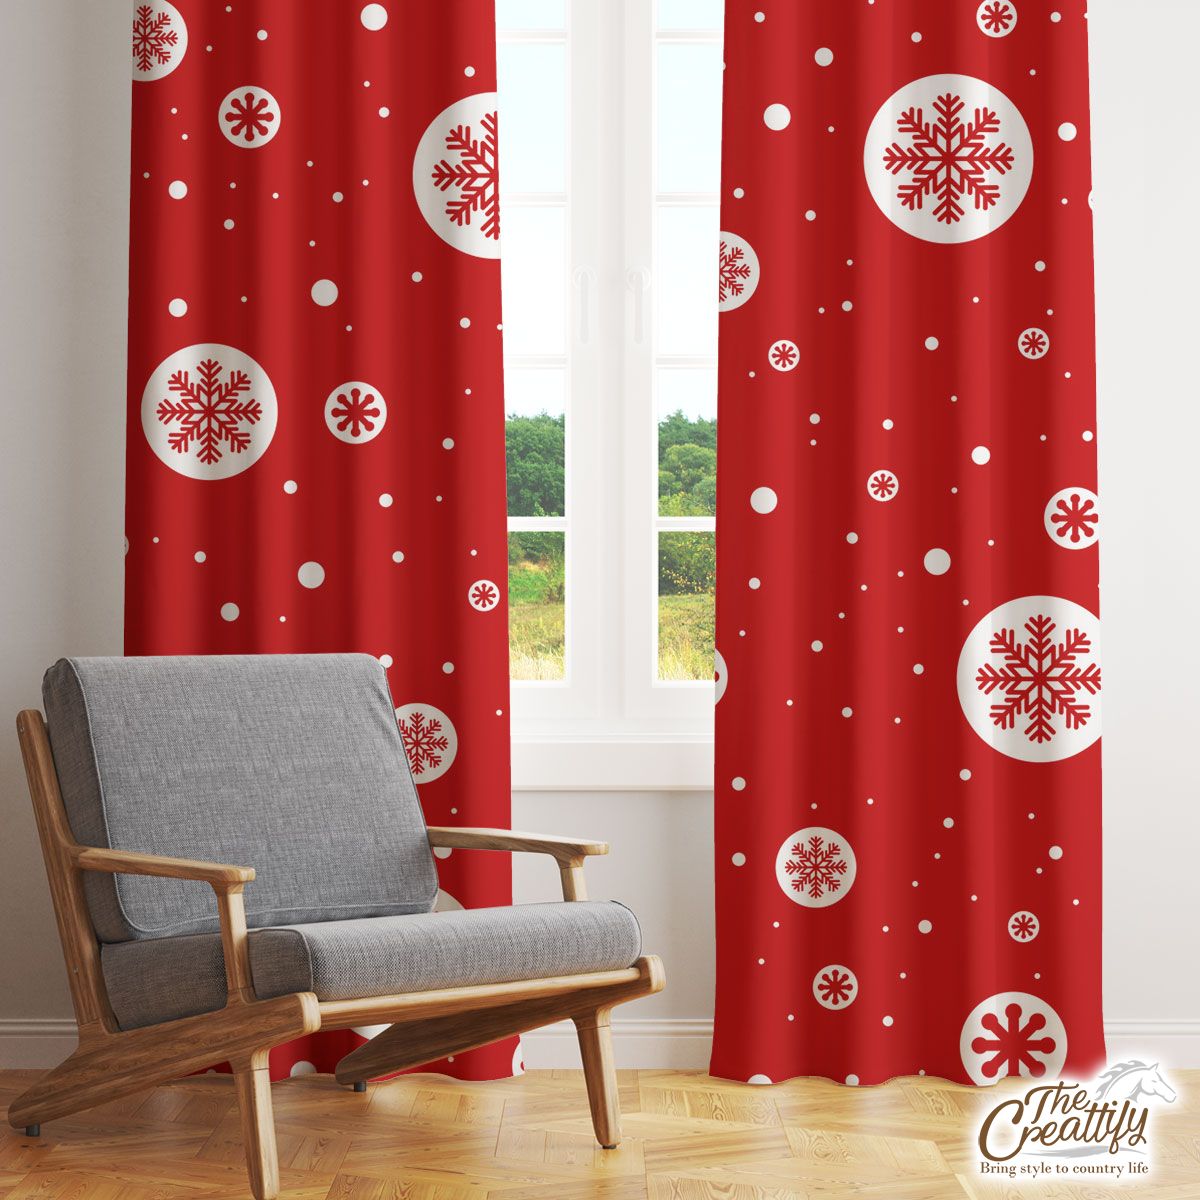 Snowflake Clipart On The Red Background Window Curtain